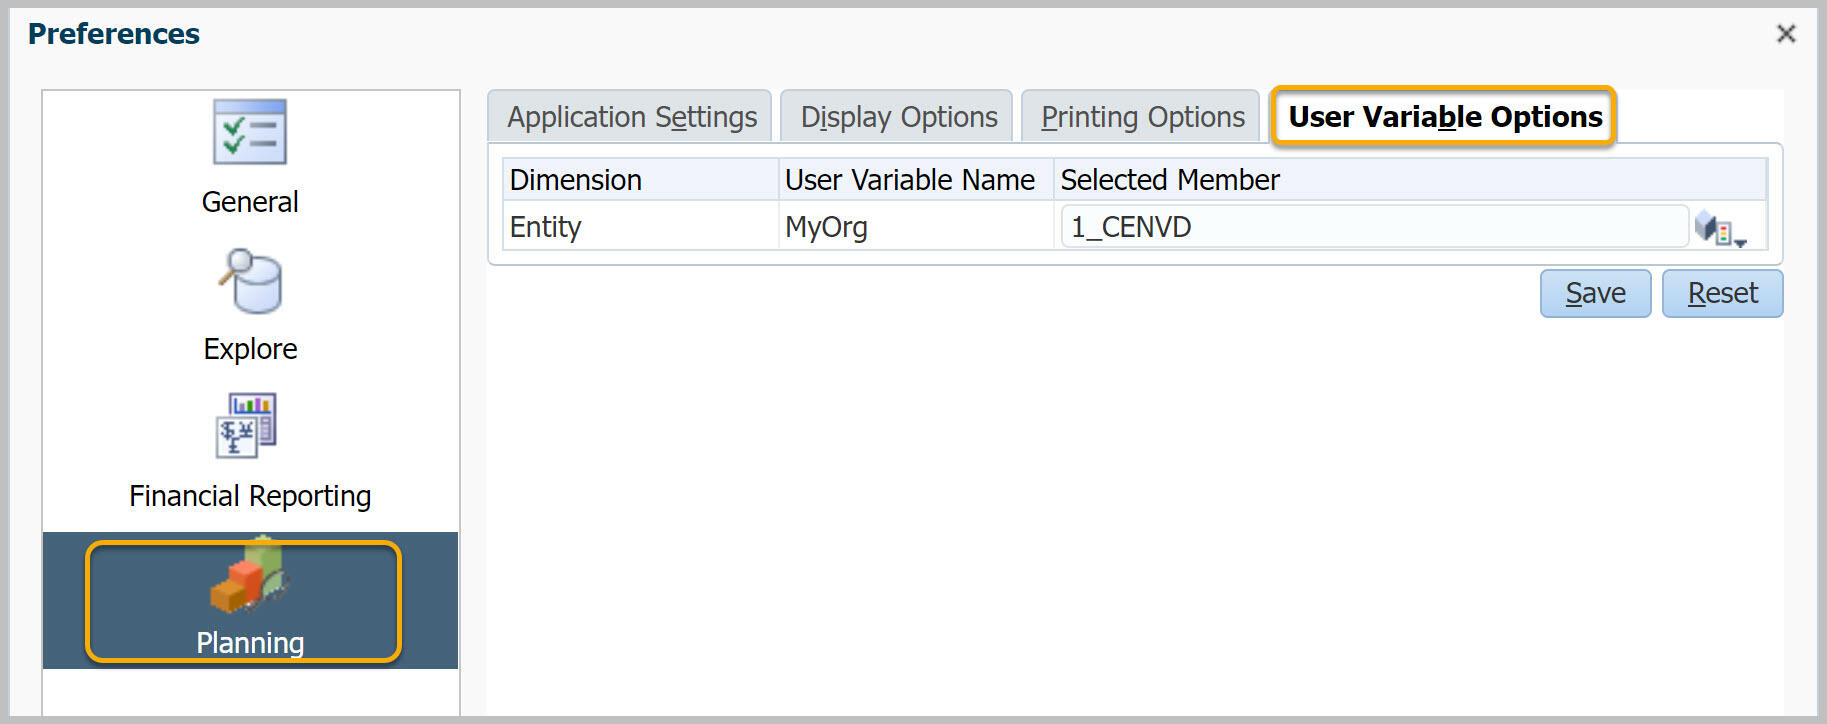 File Preferences with User Variable Options tab highlighted